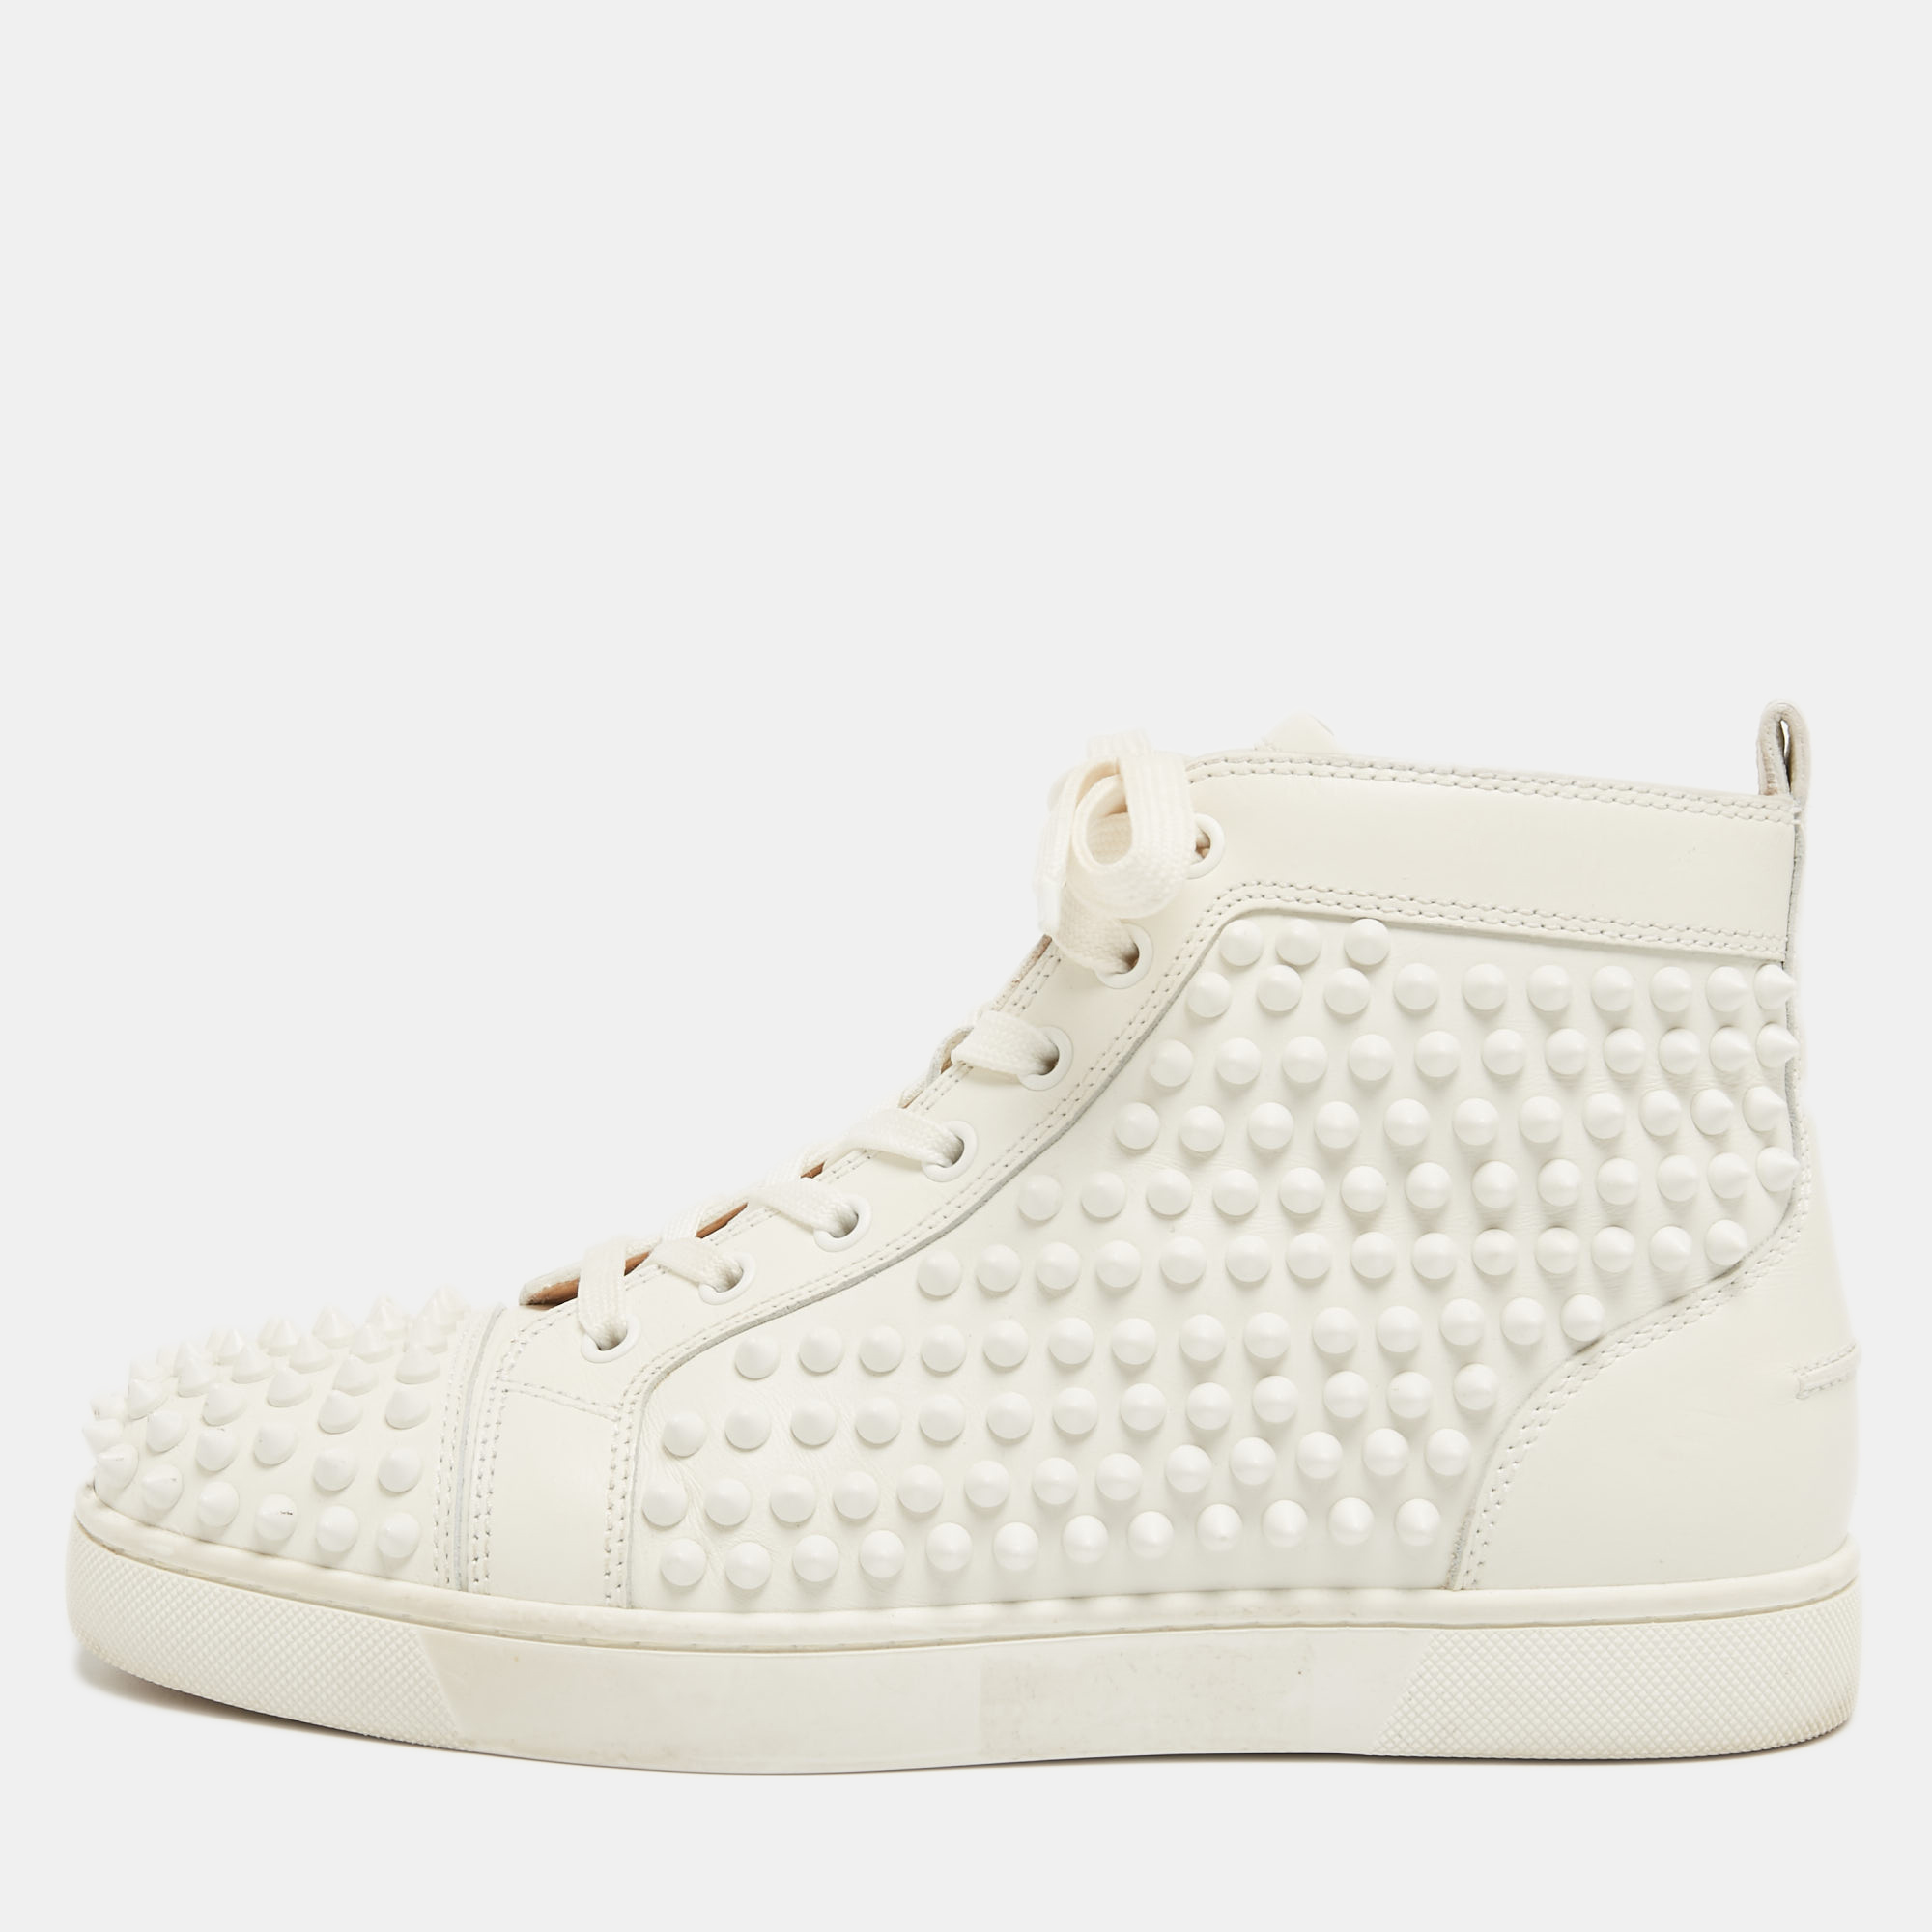 Pre-owned Christian Louboutin White Leather Louis Spikes High Top Trainers Size 39